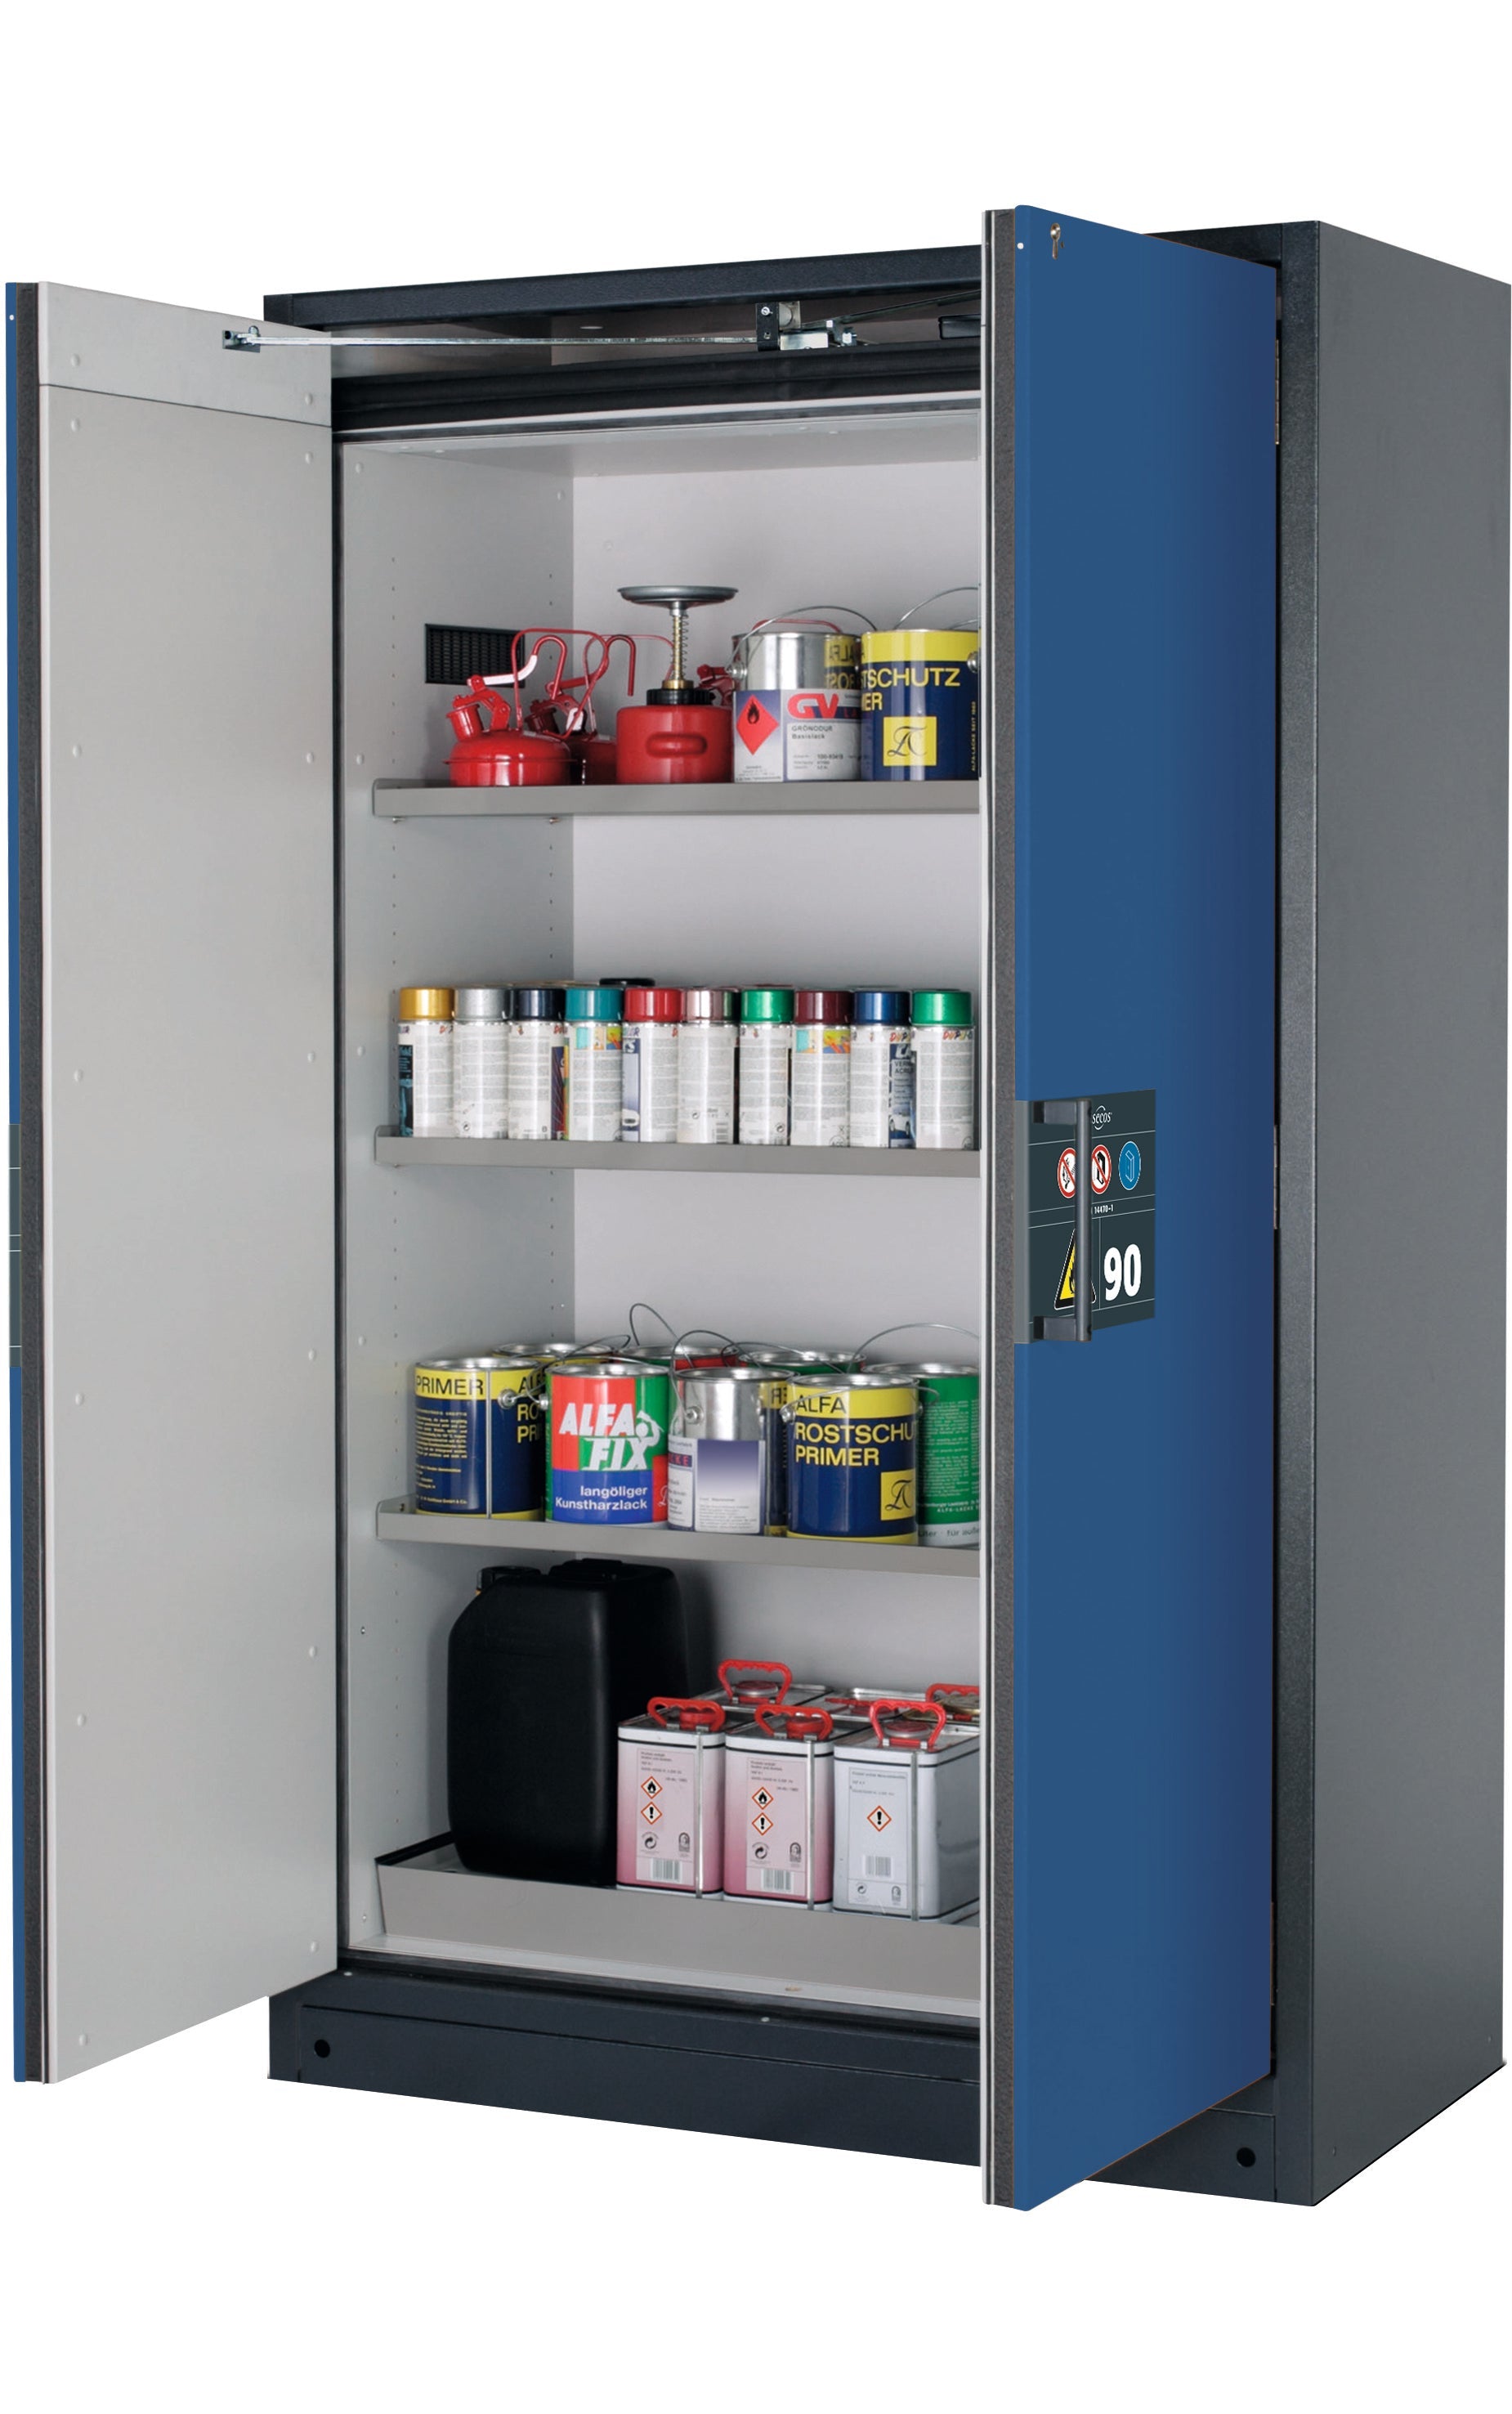 Type 90 safety storage cabinet Q-PEGASUS-90 model Q90.195.120.WDAC in gentian blue RAL 5010 with 3x shelf standard (stainless steel 1.4301),